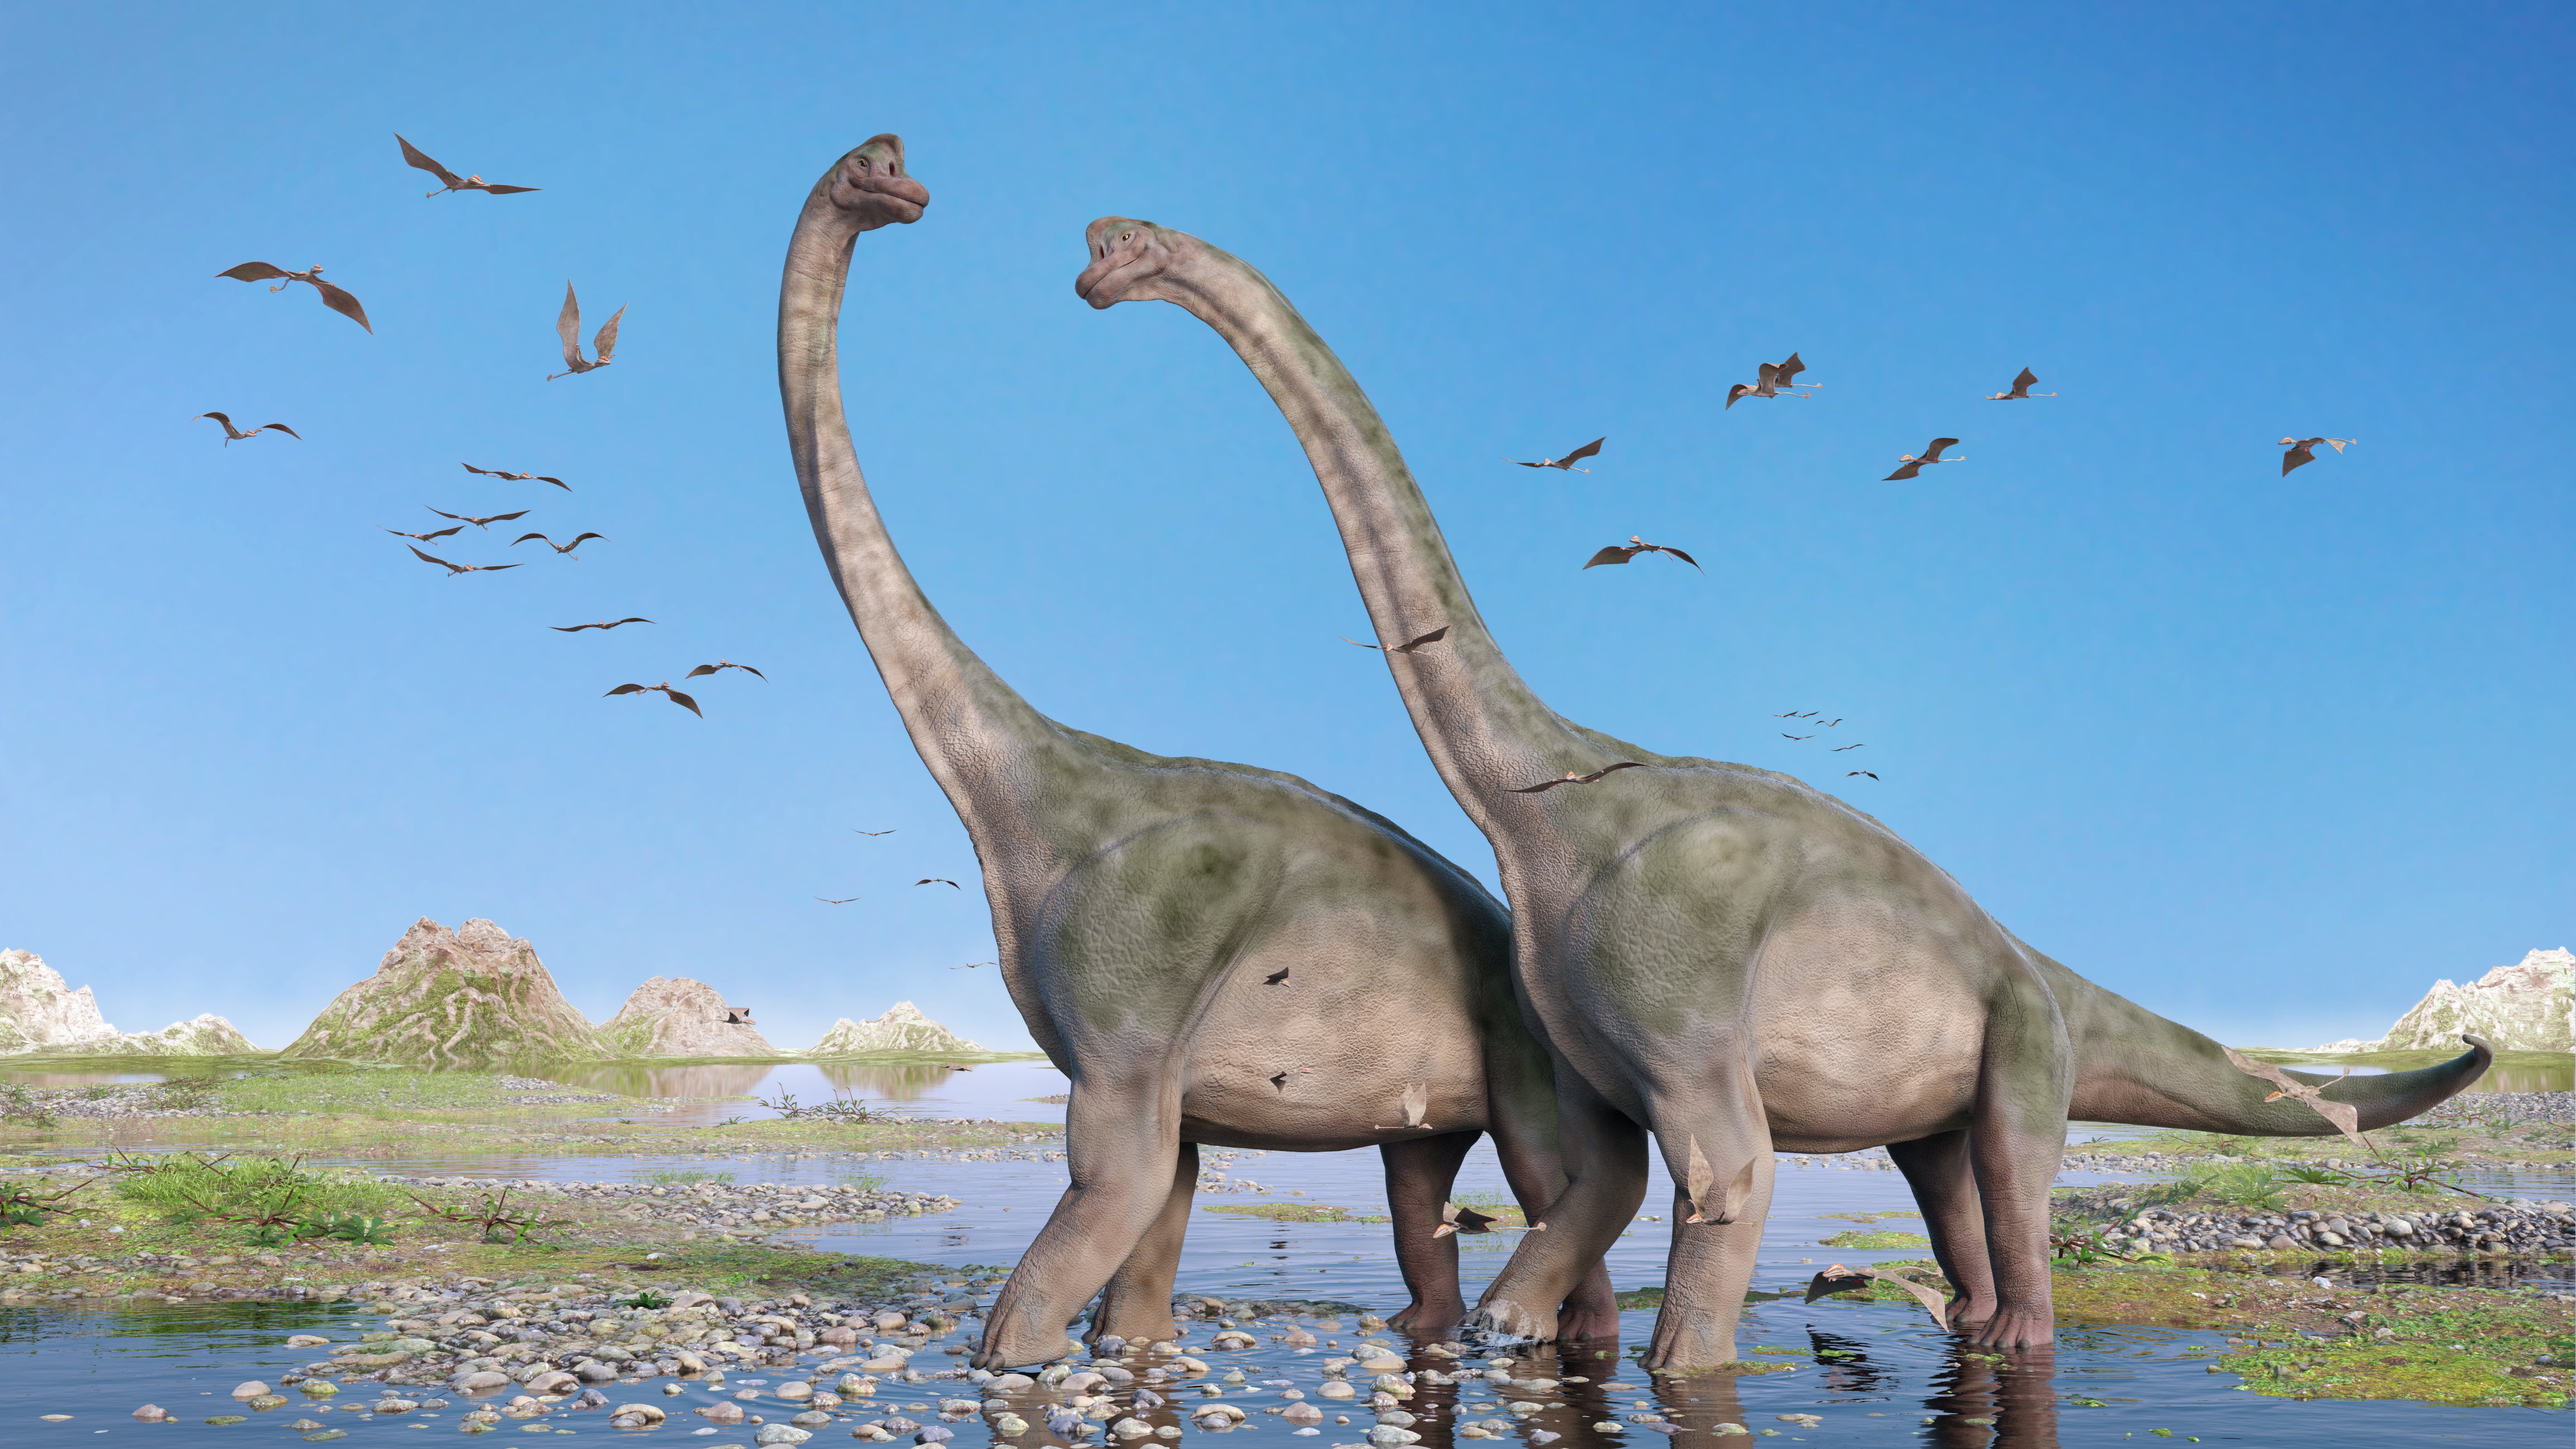 Giant sauropods walk through water amid a swarm of flying pterosaurs